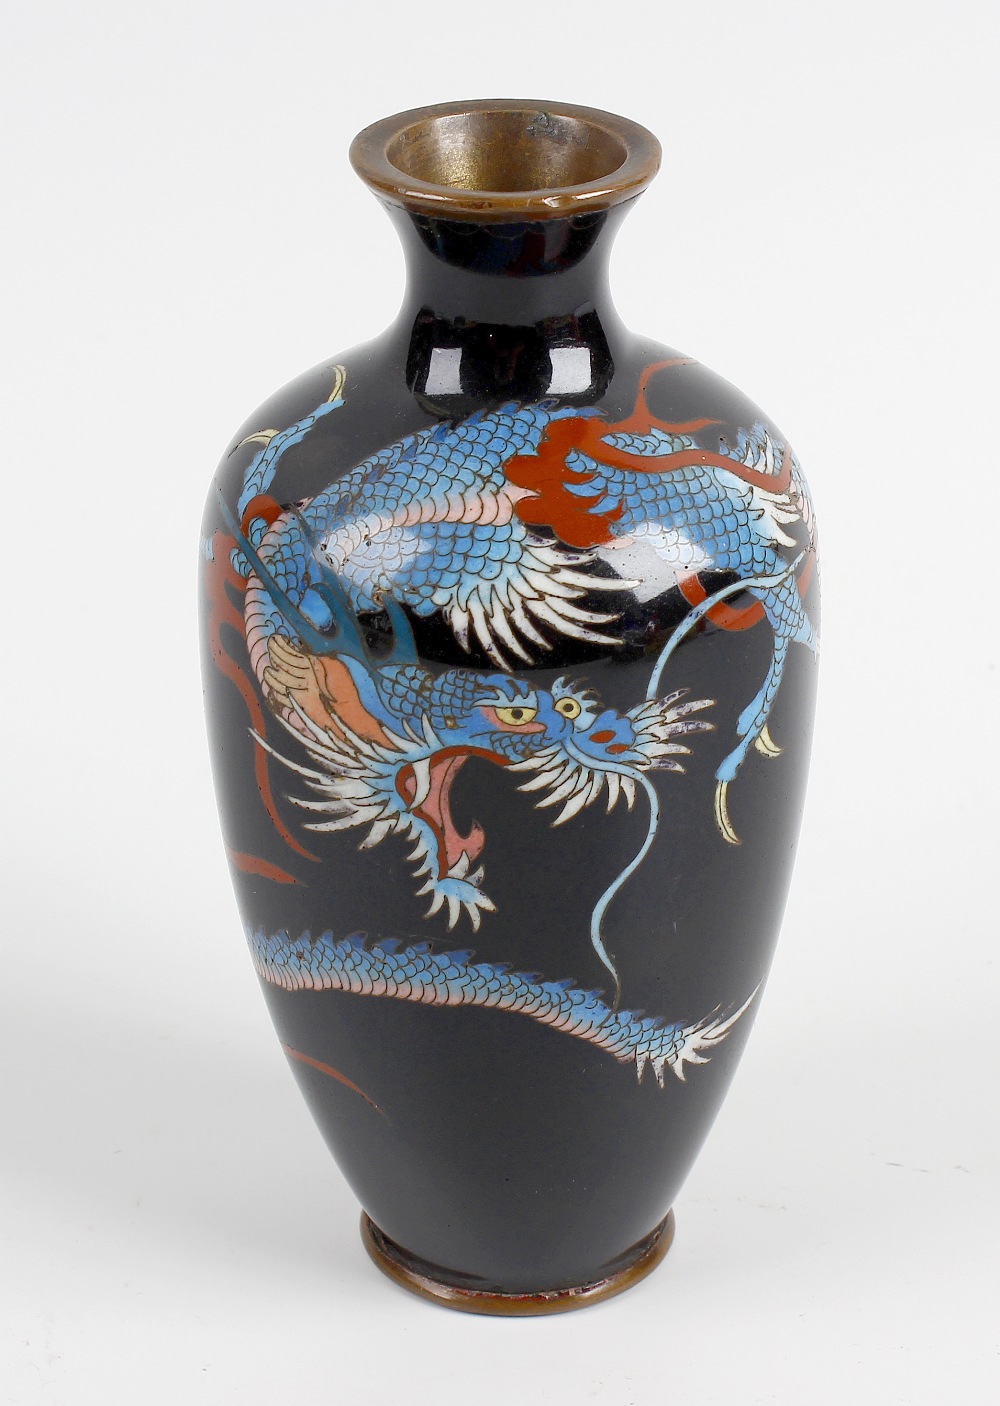 A small cloisonne vase with slender tapered ovoid body finished in a dark blue coloured ground